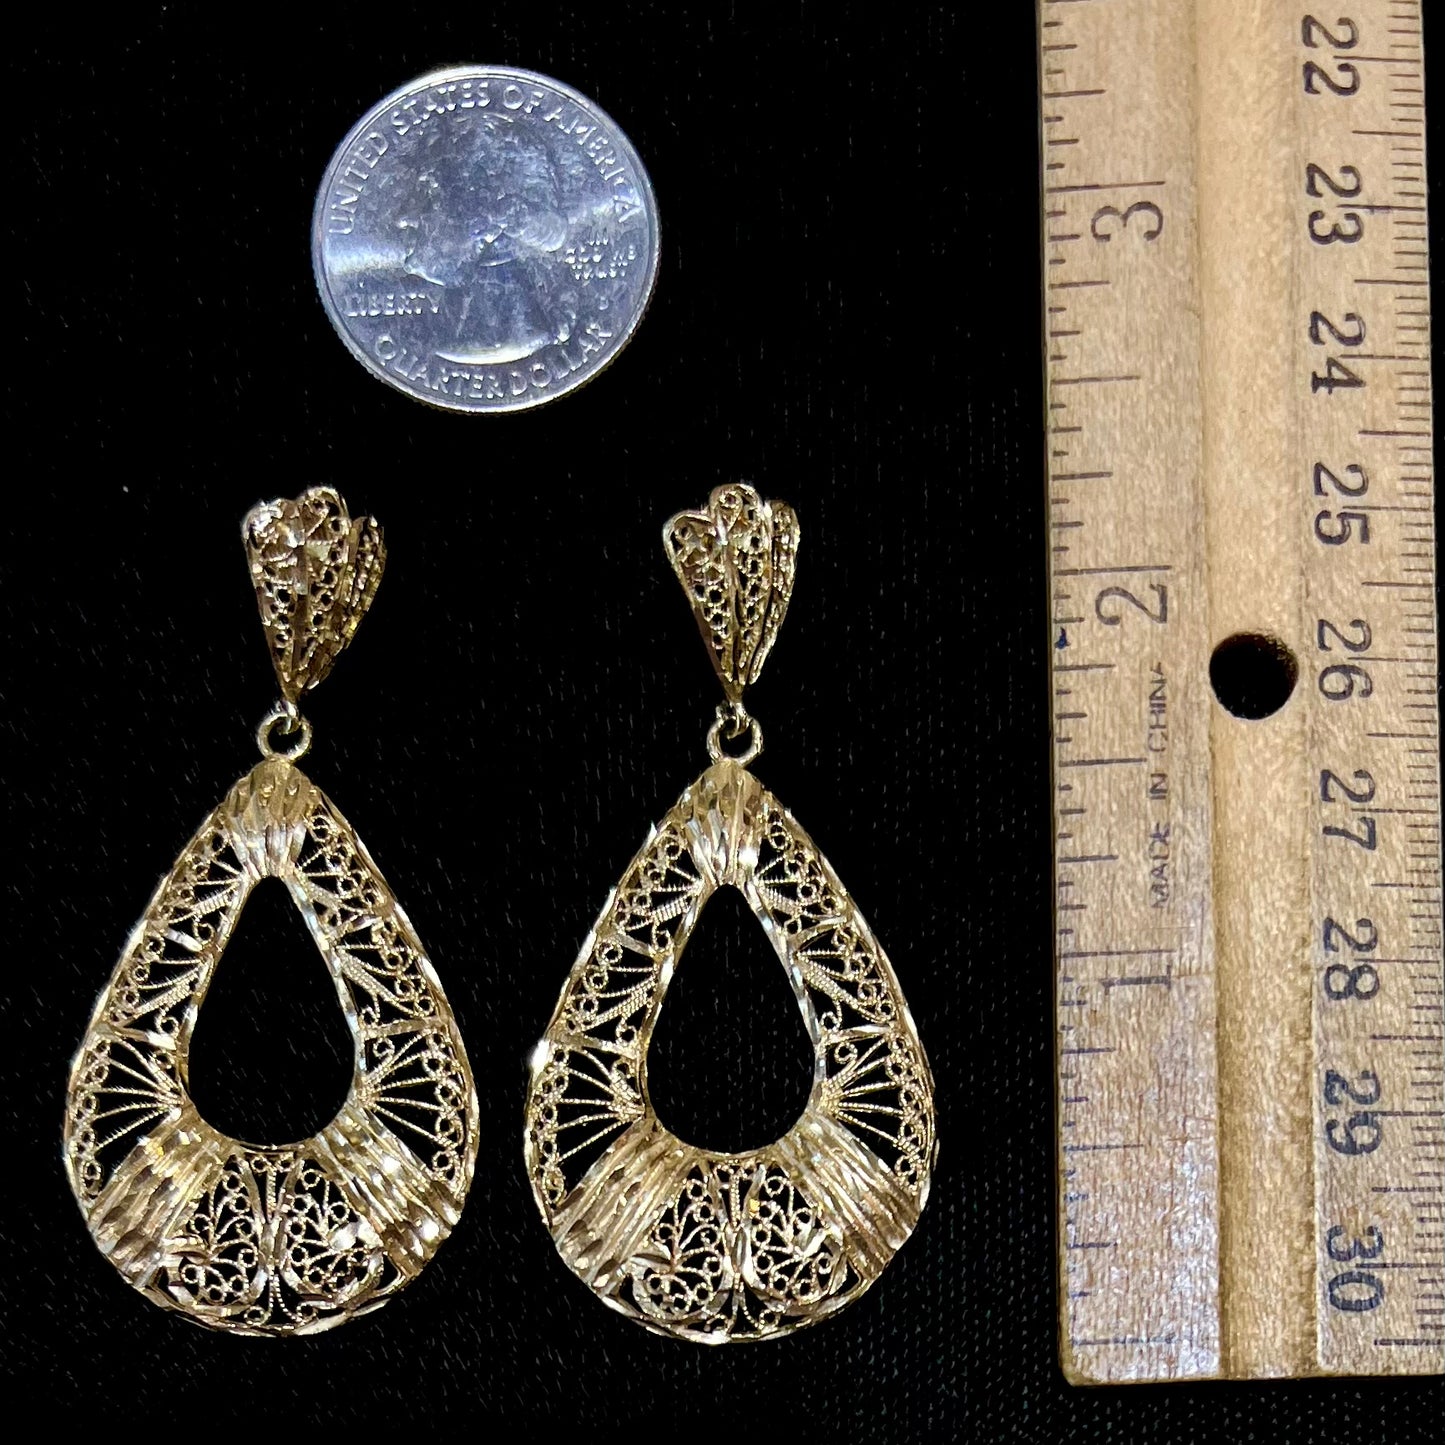 A pair of 14kt yellow gold filigree dangle earrings.  The earrings have a pear shape open design.